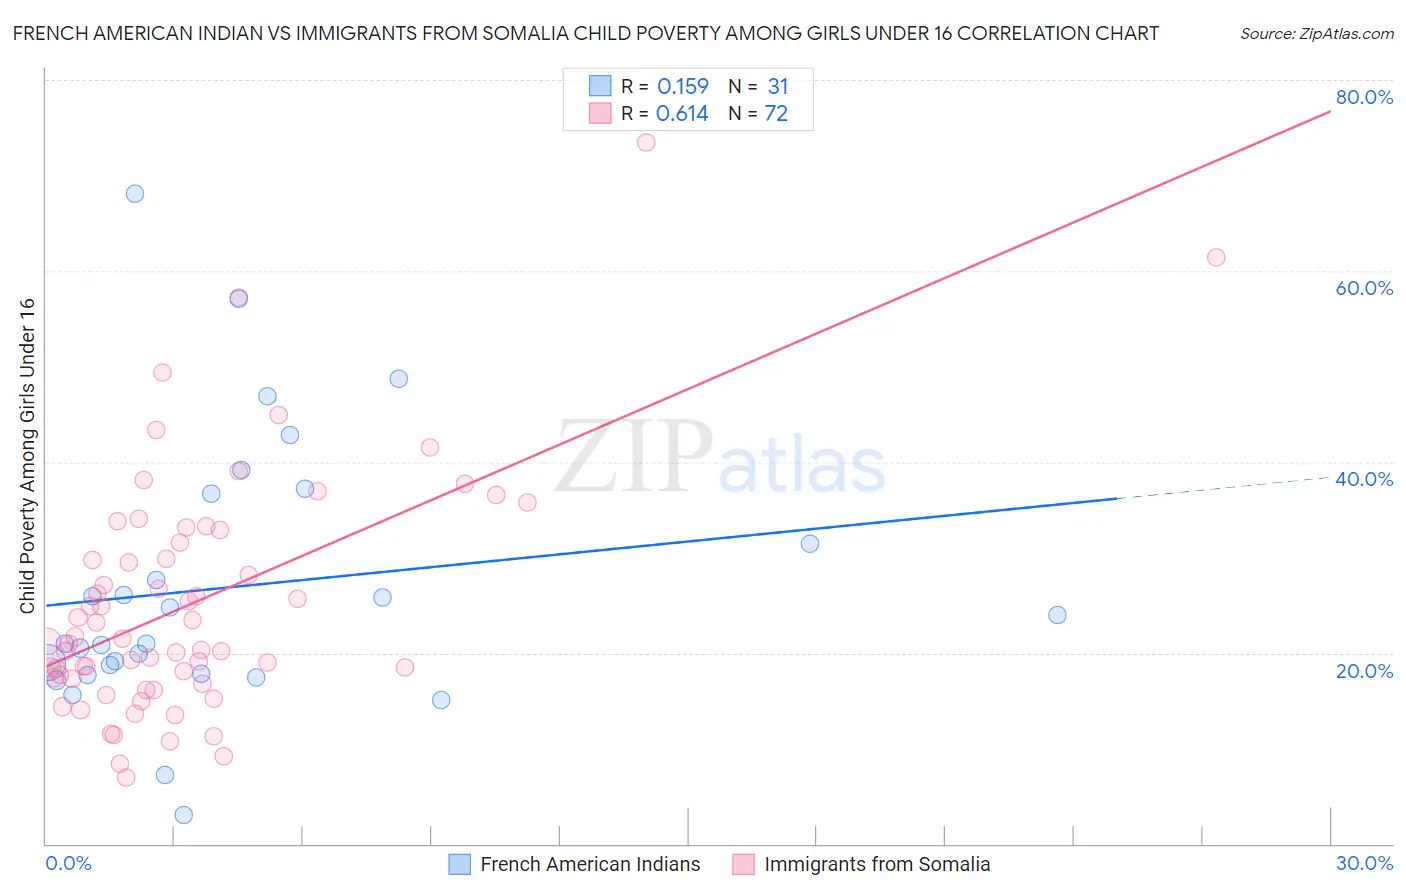 French American Indian vs Immigrants from Somalia Child Poverty Among Girls Under 16